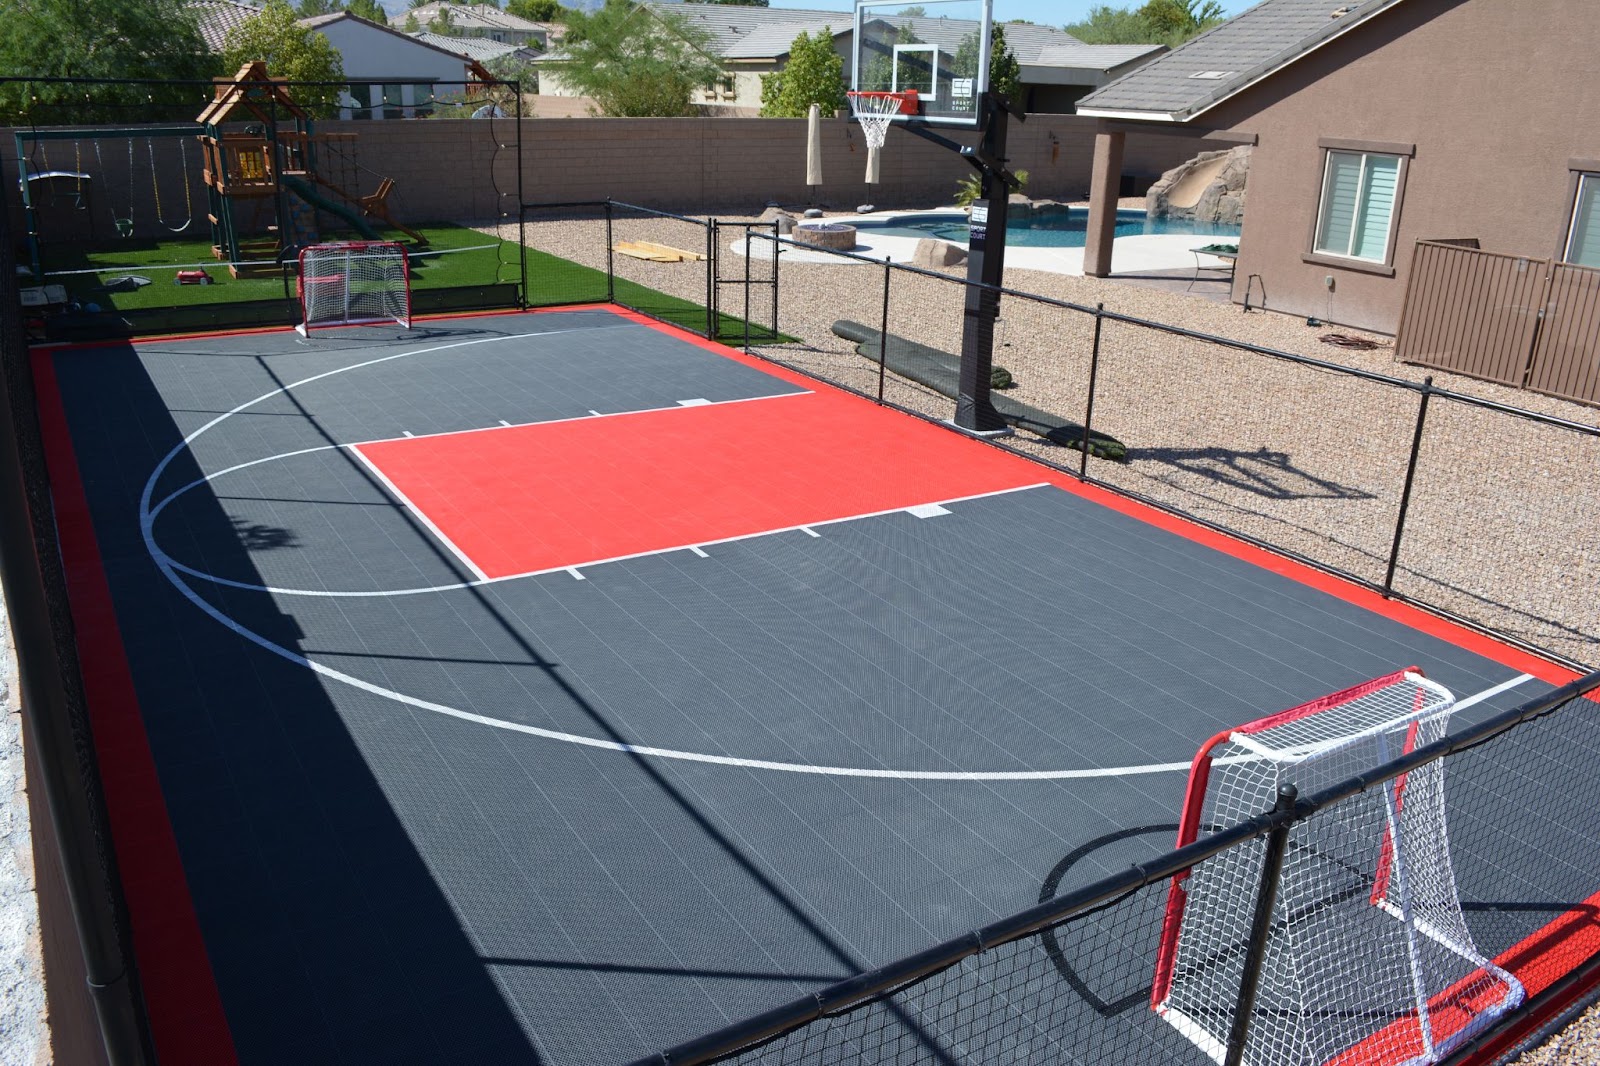 Ultimate Backyard Makeover: Install a Court for Active Fun